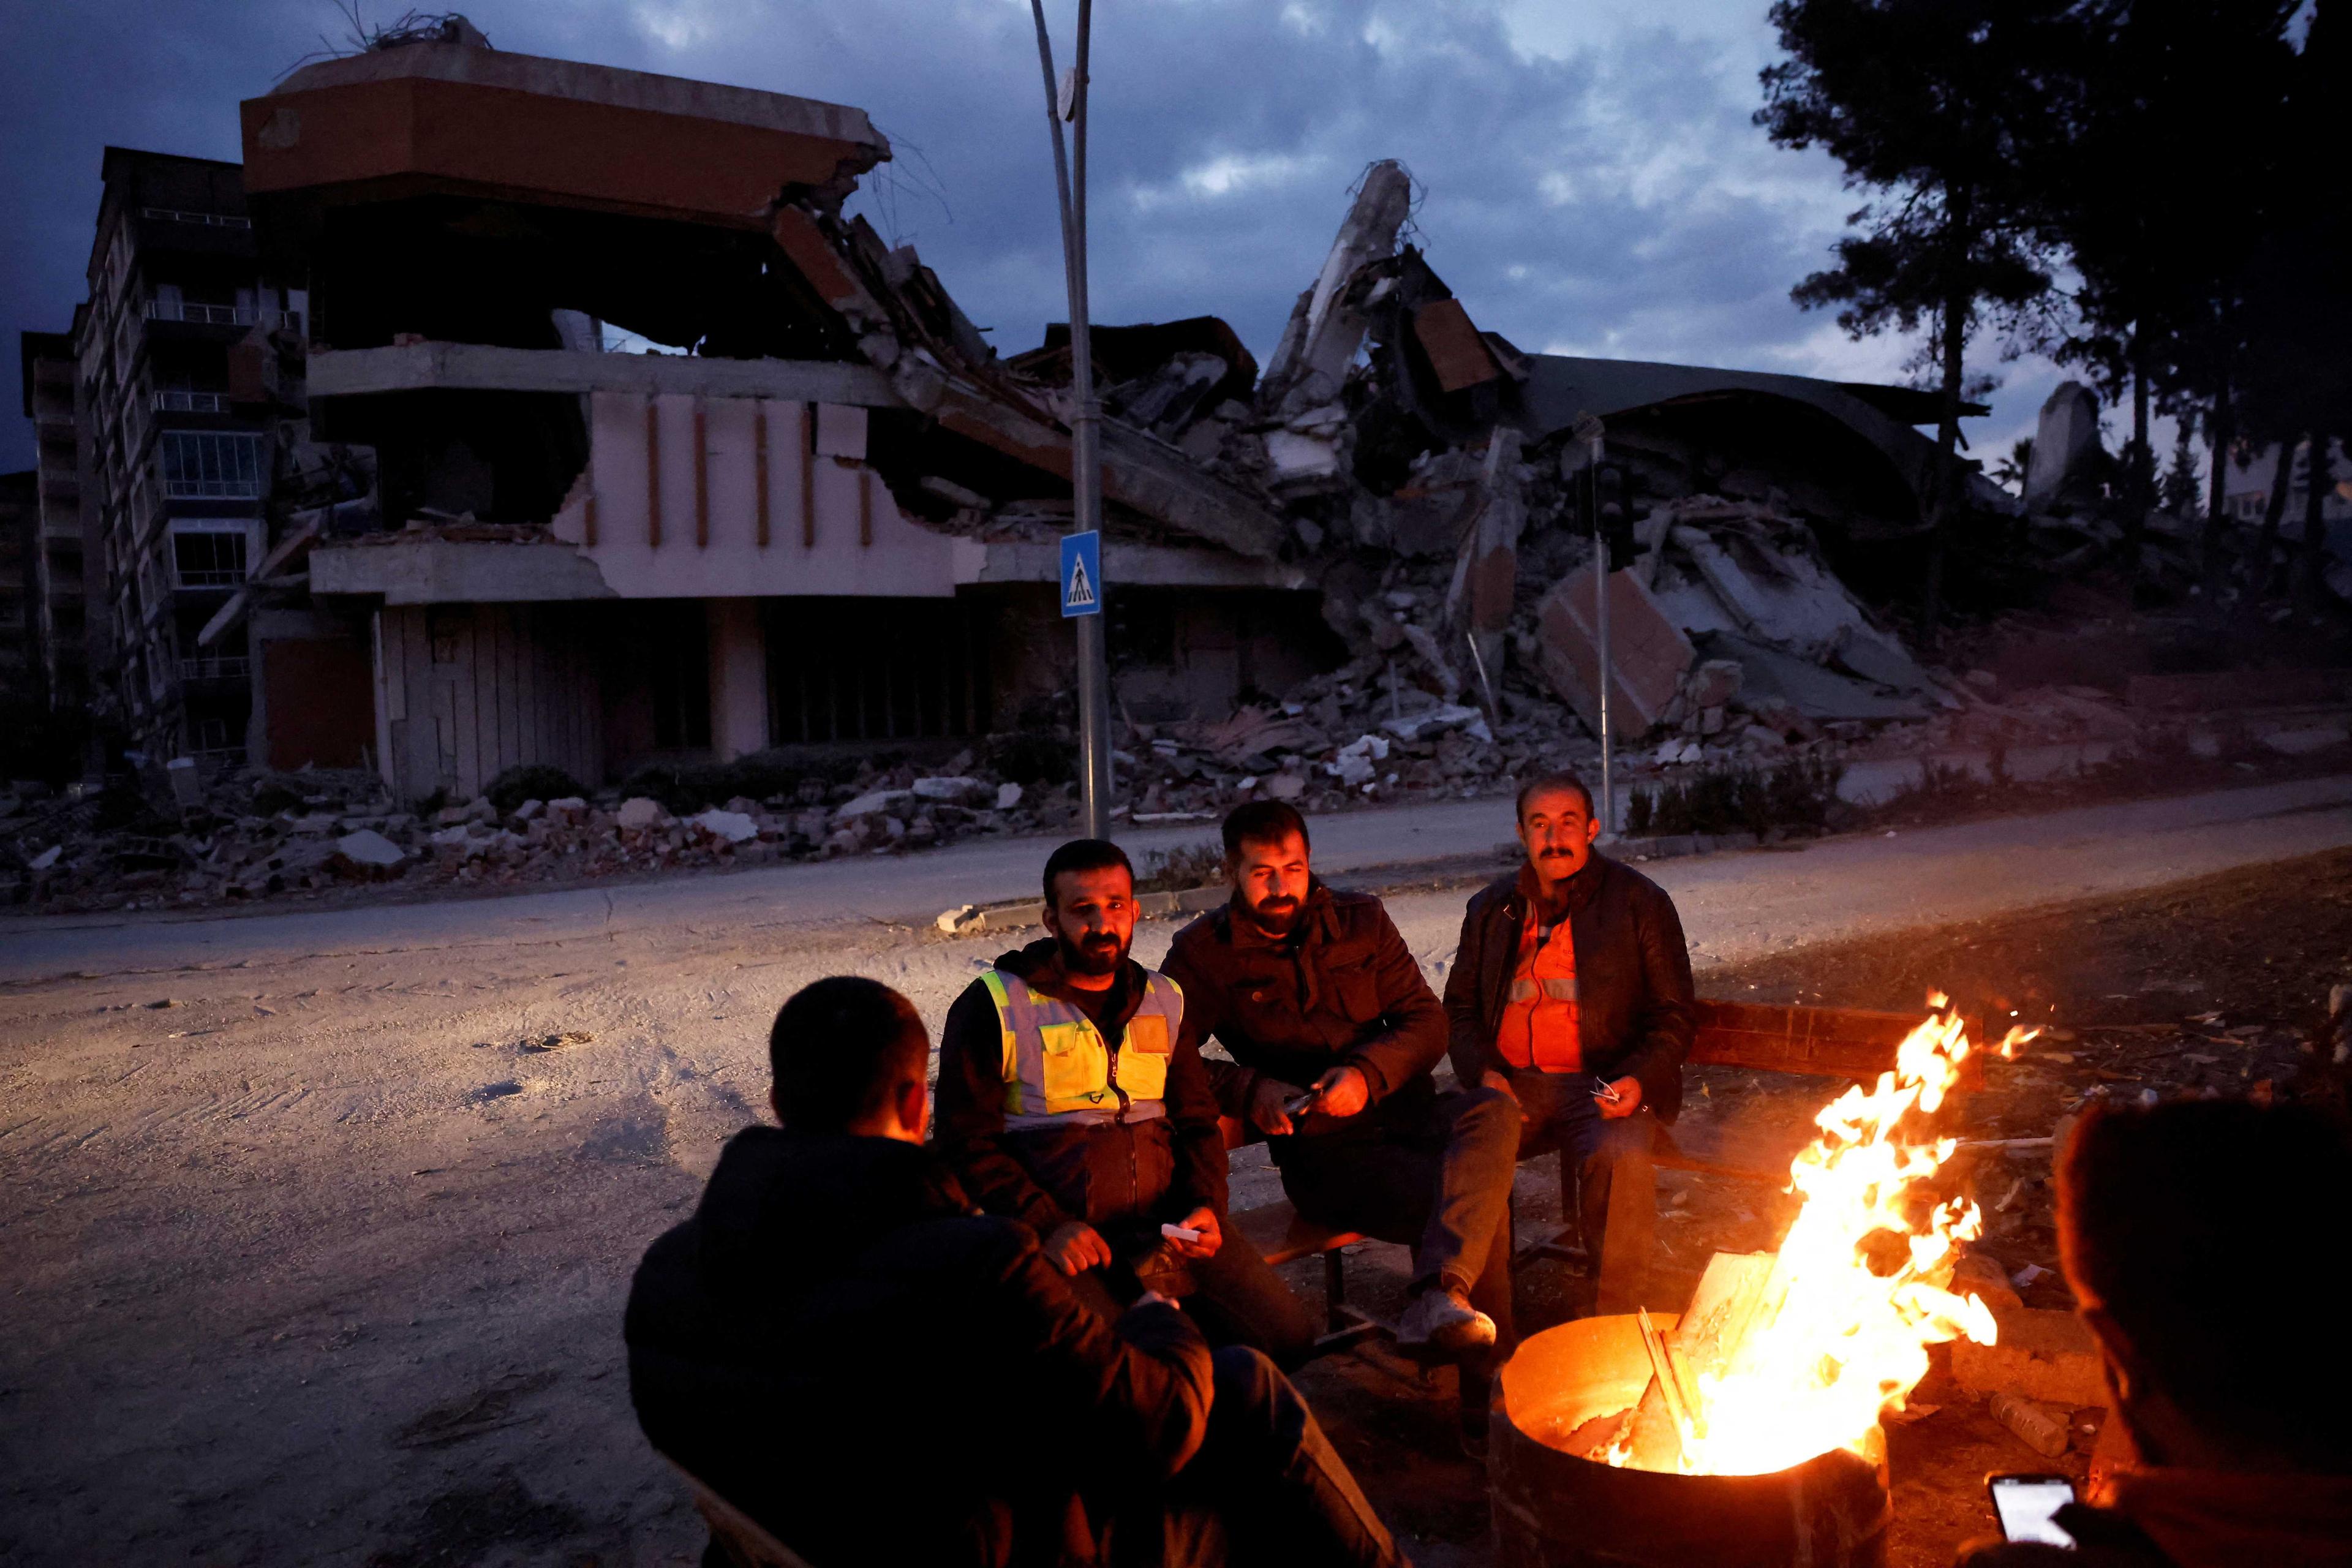 People warm themselves by a fire beside a collapsed building and rubble, in the aftermath of a deadly earthquake, in Antakya, Hatay province, Turkey, Feb 21. Photo: Reuters